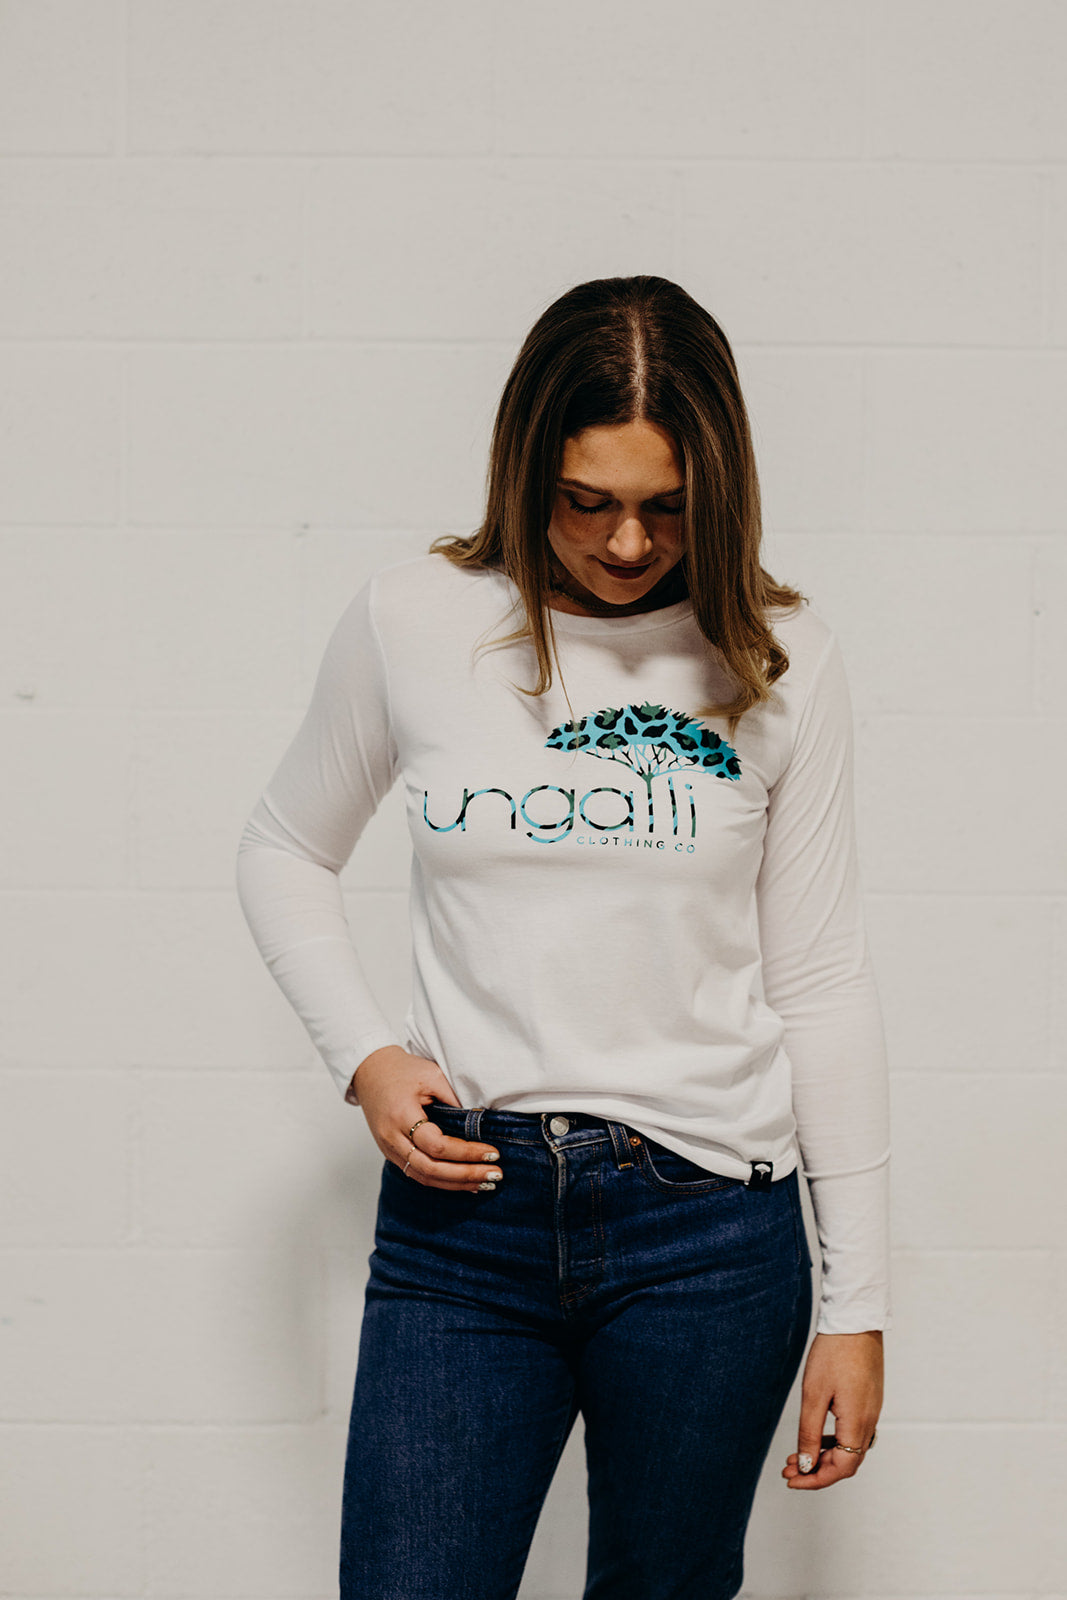 White long sleeve ethically made top with Ungalli logo